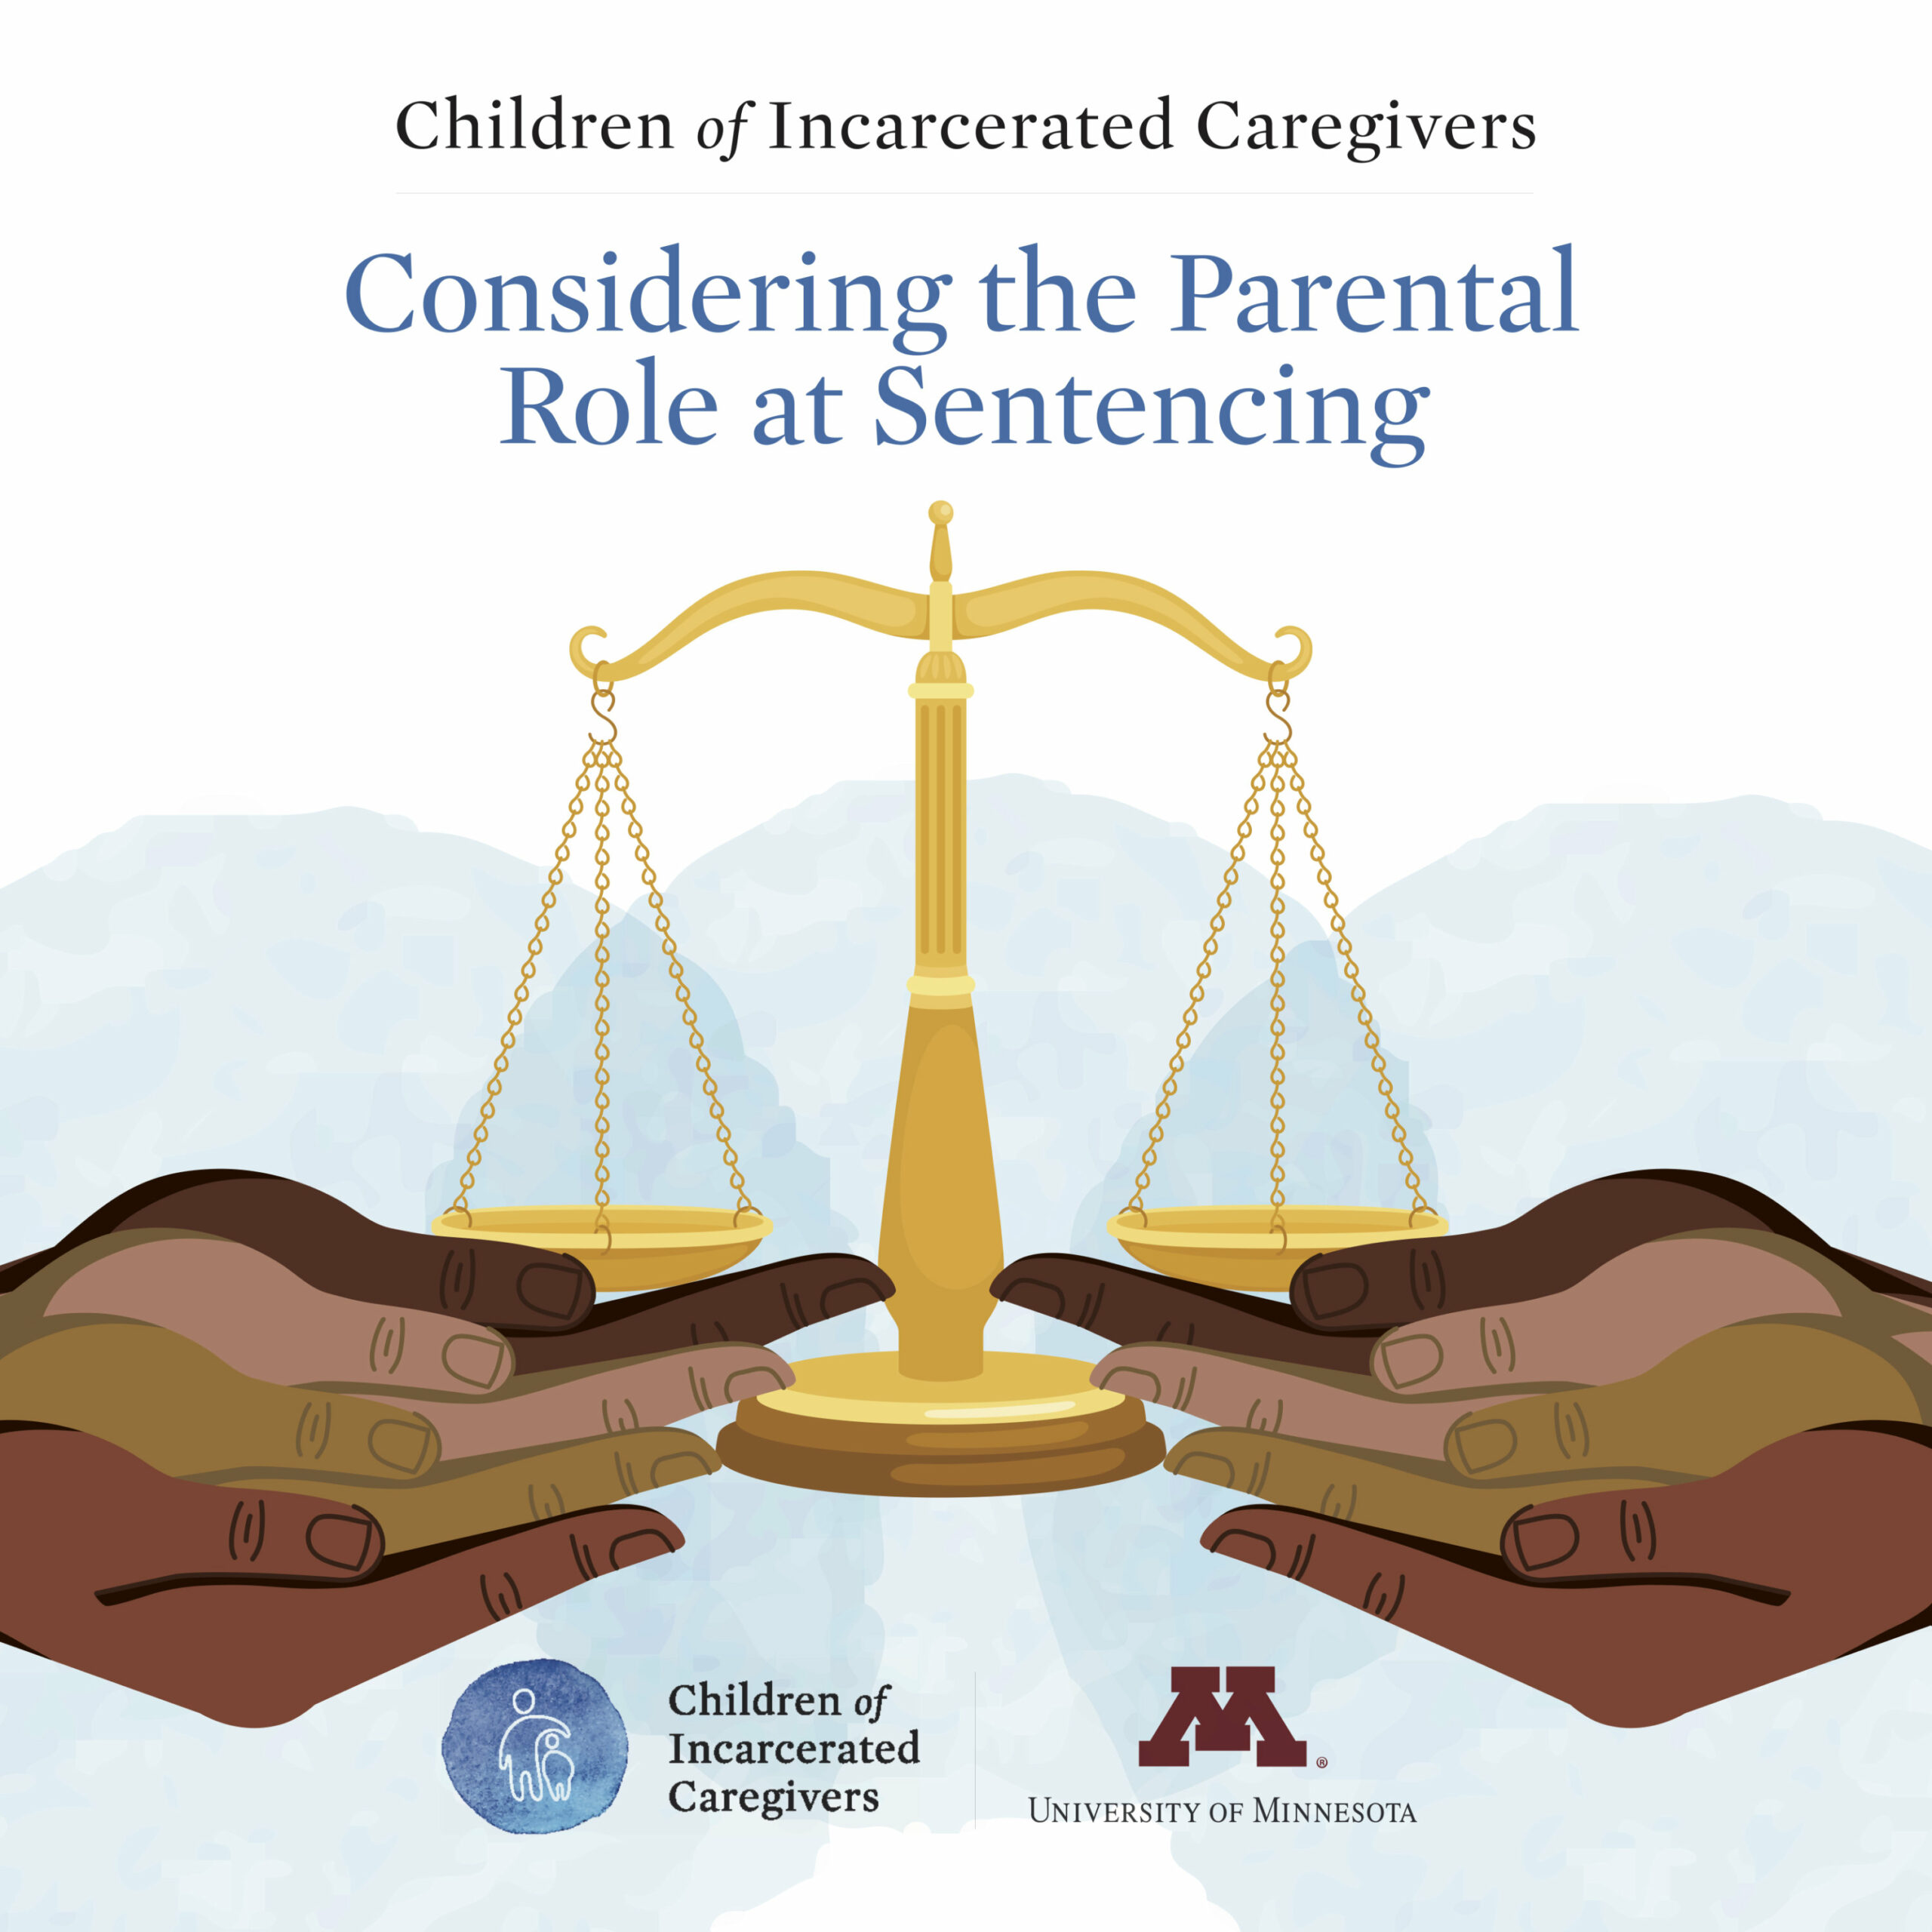 Children of Incarcerated Caregivers and the Human Rights Podcast on Considering the Parental Role at Sentencing